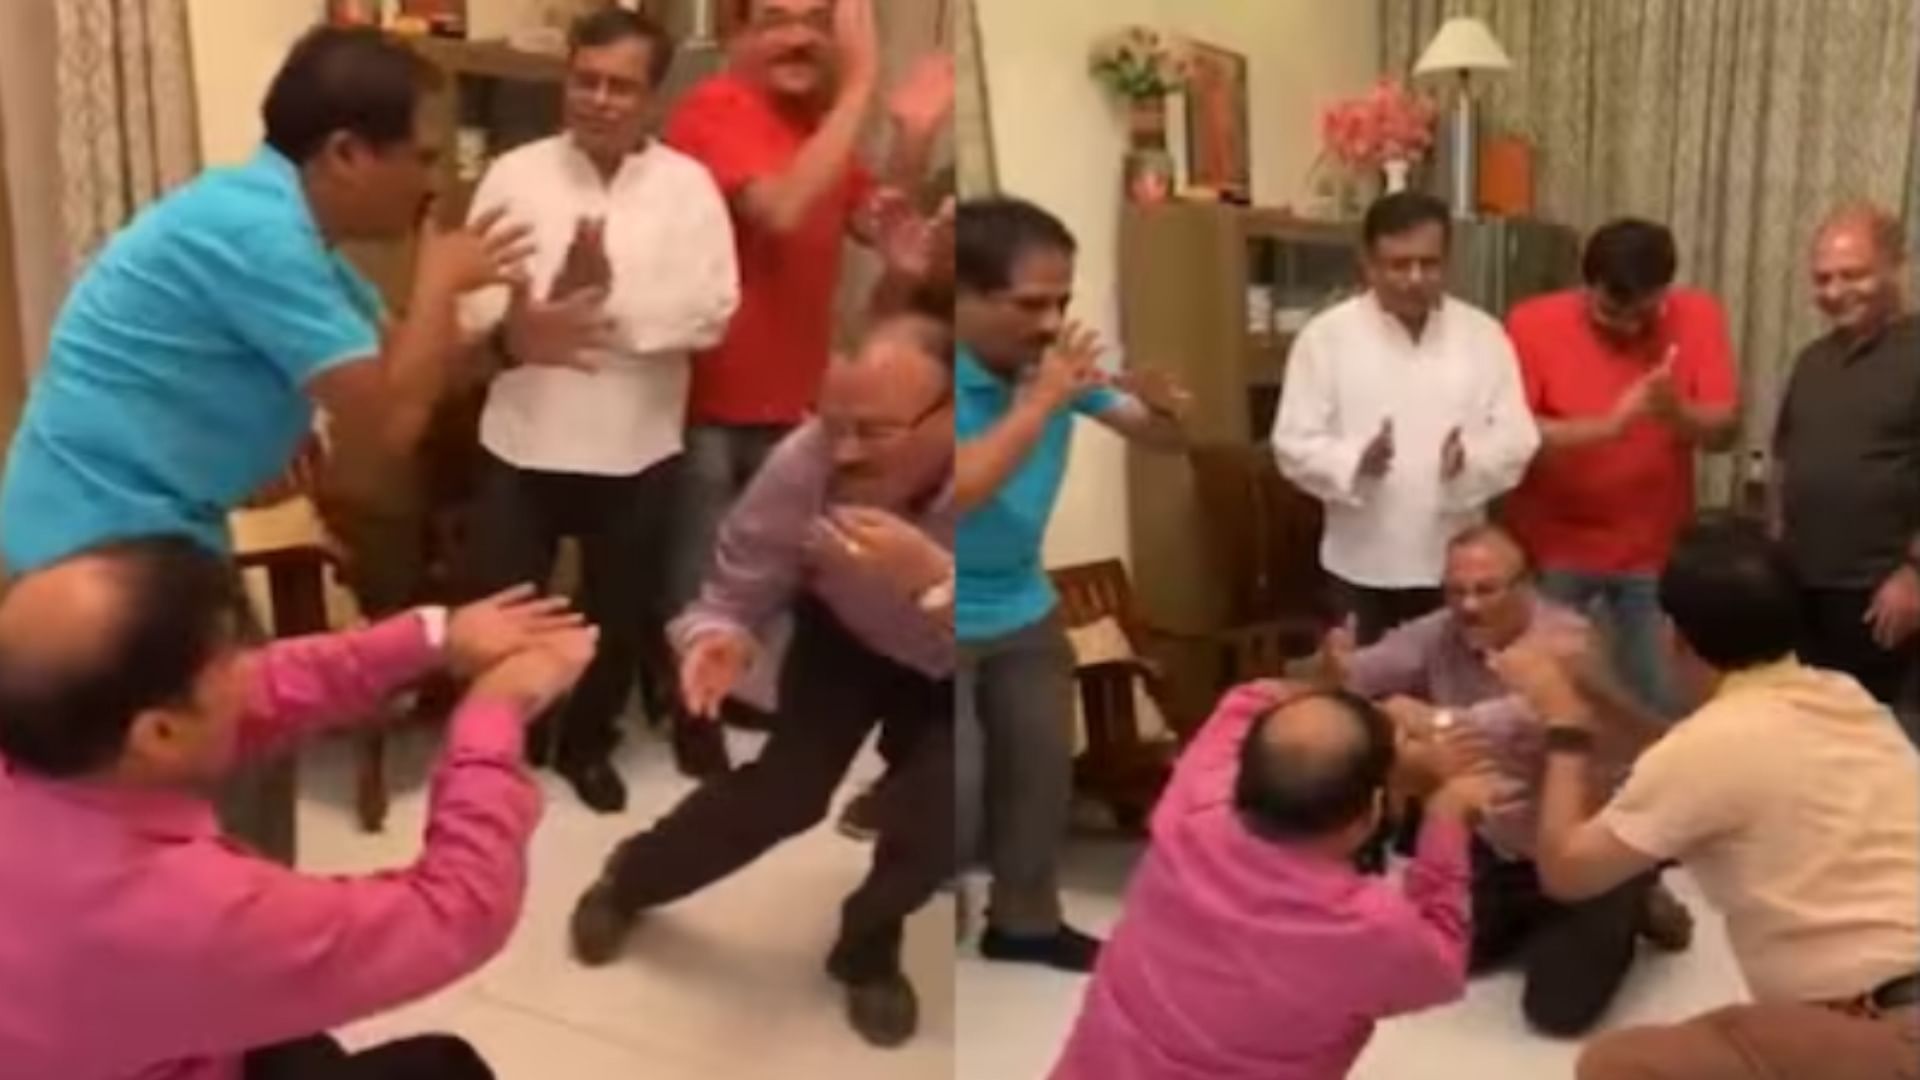 Funny Video uncle did nagin dance with friends video goes viral on social media